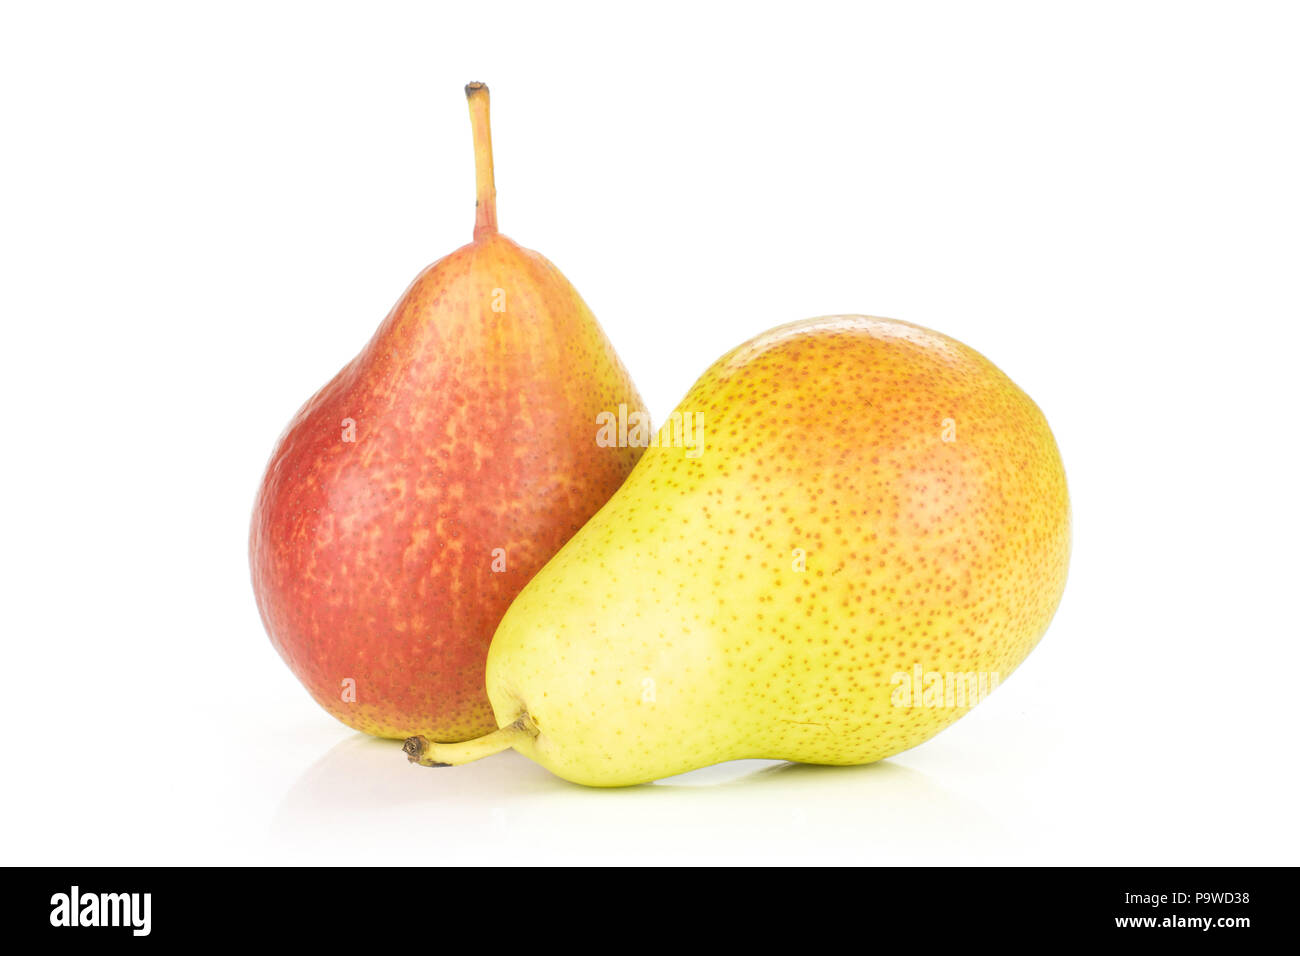 Group of two whole fresh red pear forelle variety ripe isolated on white Stock Photo